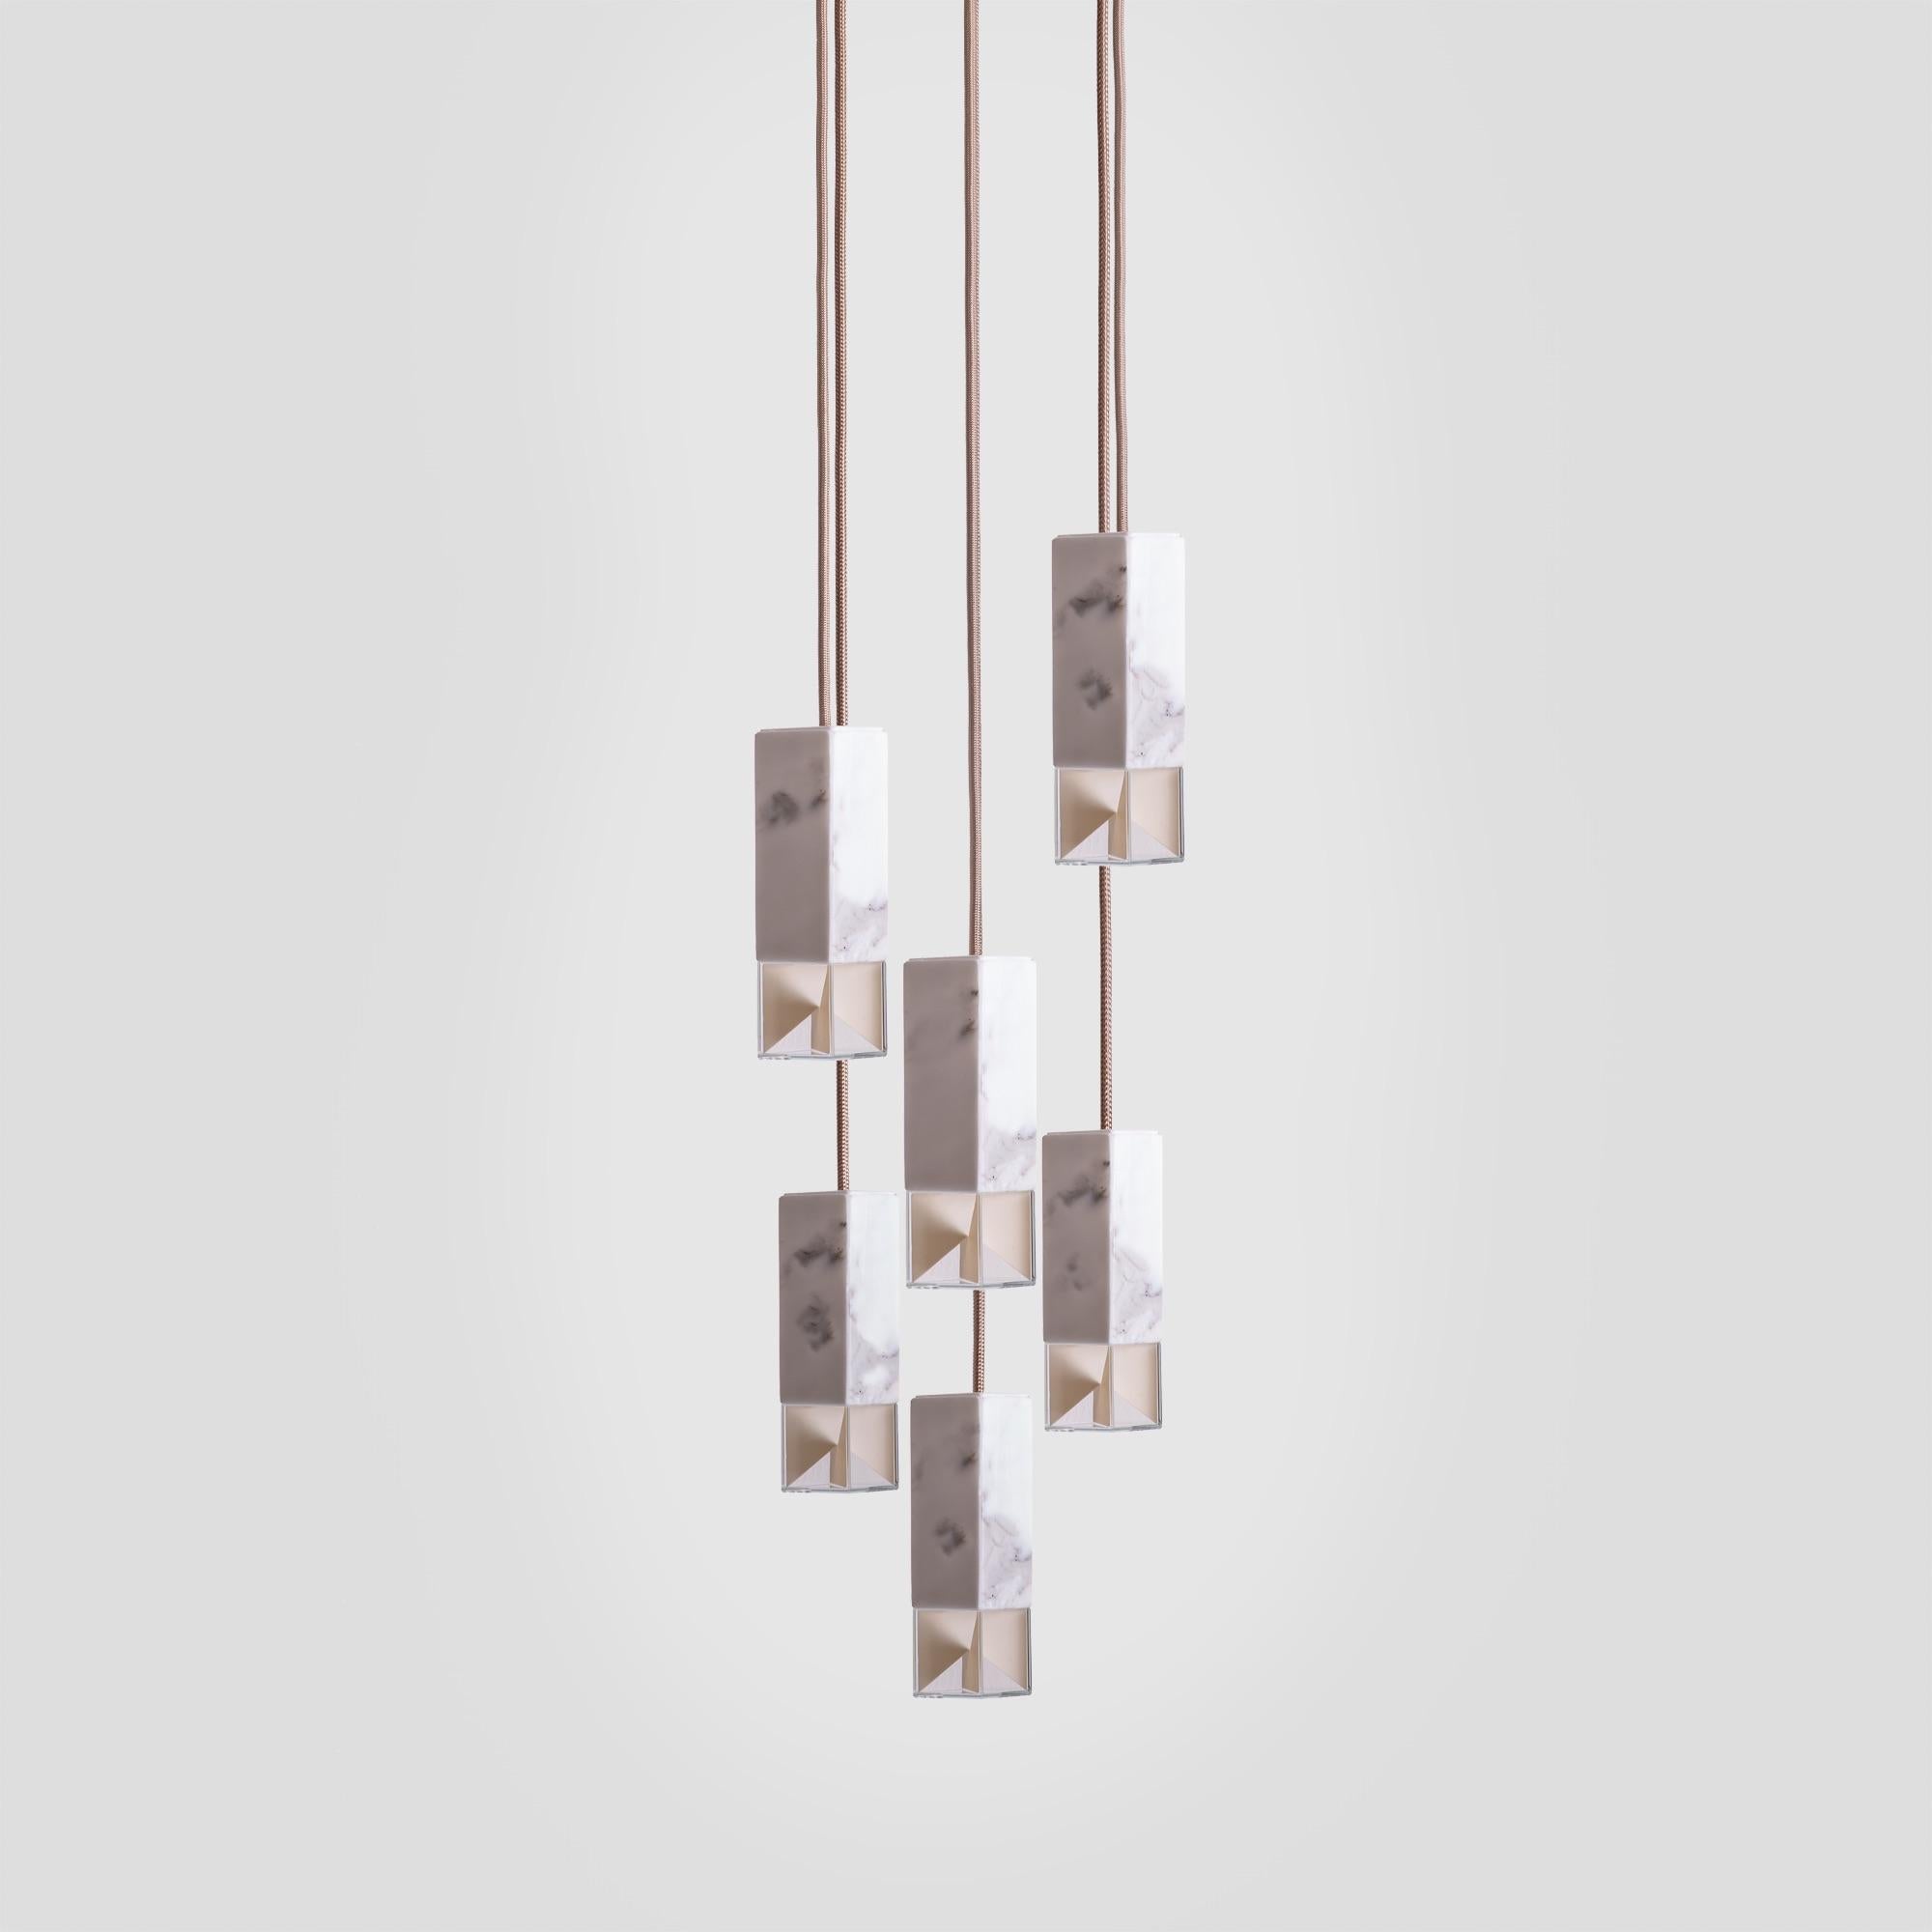 About
Suspension Lamp 6 Light Chandelier Calacatta Marble Handmade by Formaminima

Lamp/One Marble 6 Light Chandelier from Chandeliers Series
Design by Formaminima
Chandelier
Materials:
Body lamp handcrafted in solid Calacatta marble / crystal glass